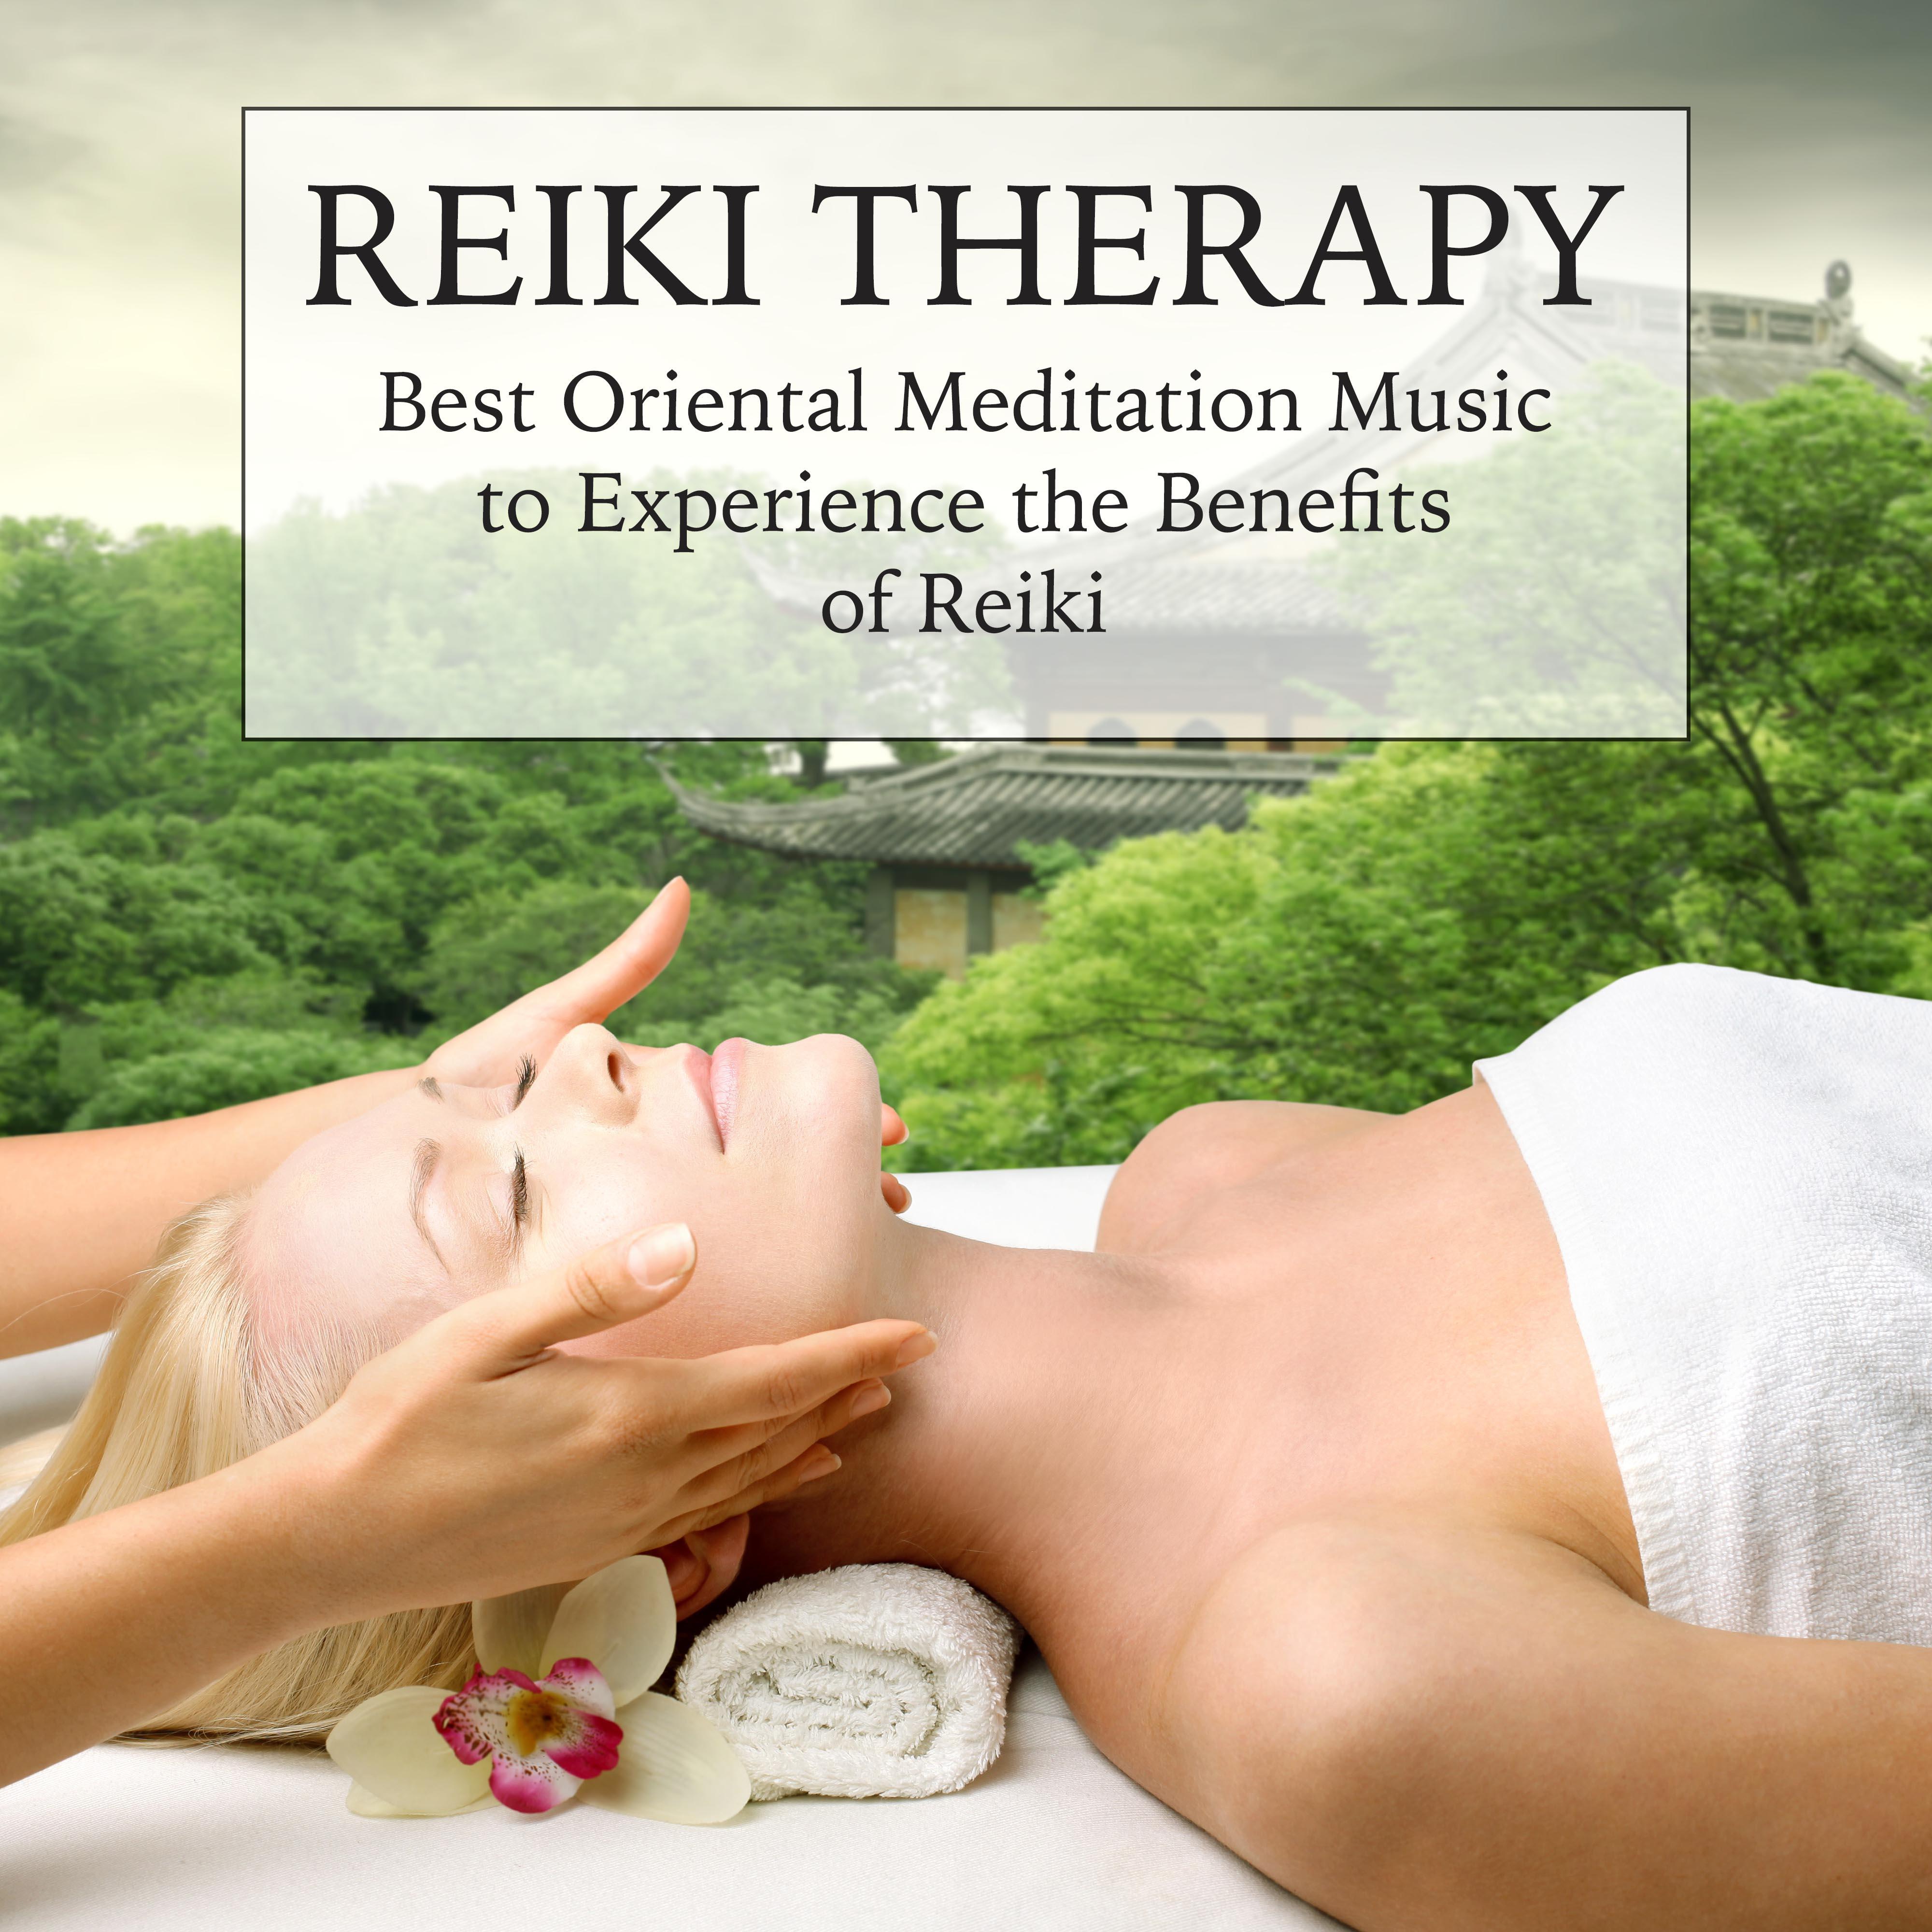 Reiki Therapy - Best Oriental Meditation Music to Experience the Benefits of Reiki